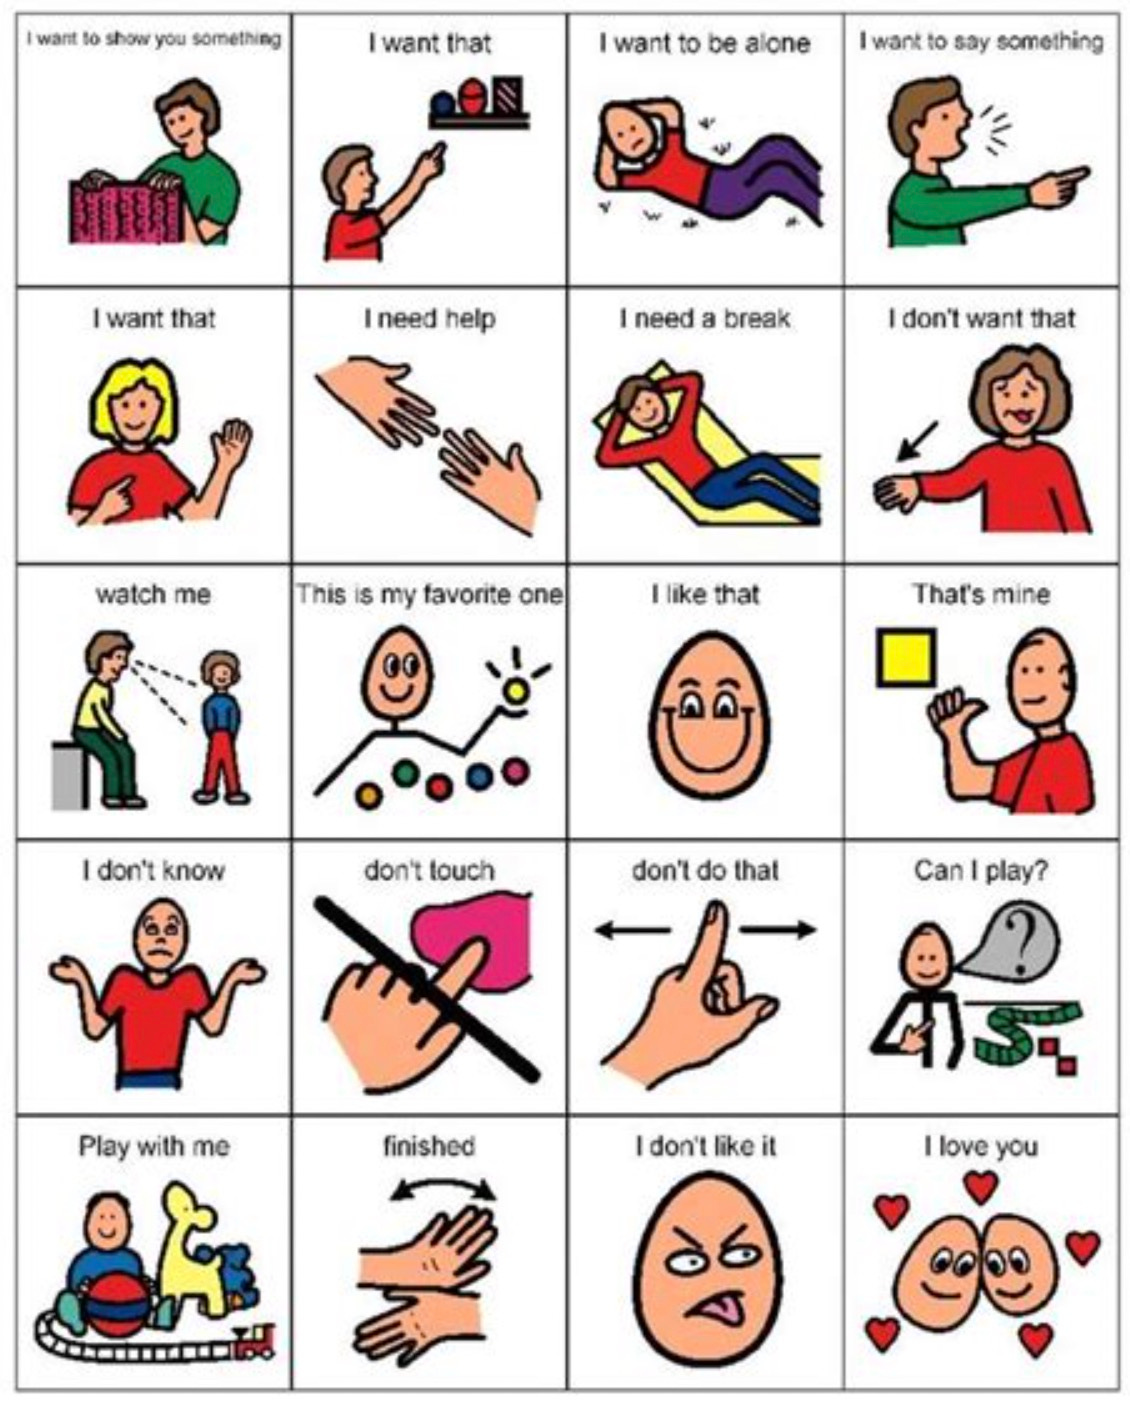 A picture board for a non-verbal person to point and communicate with